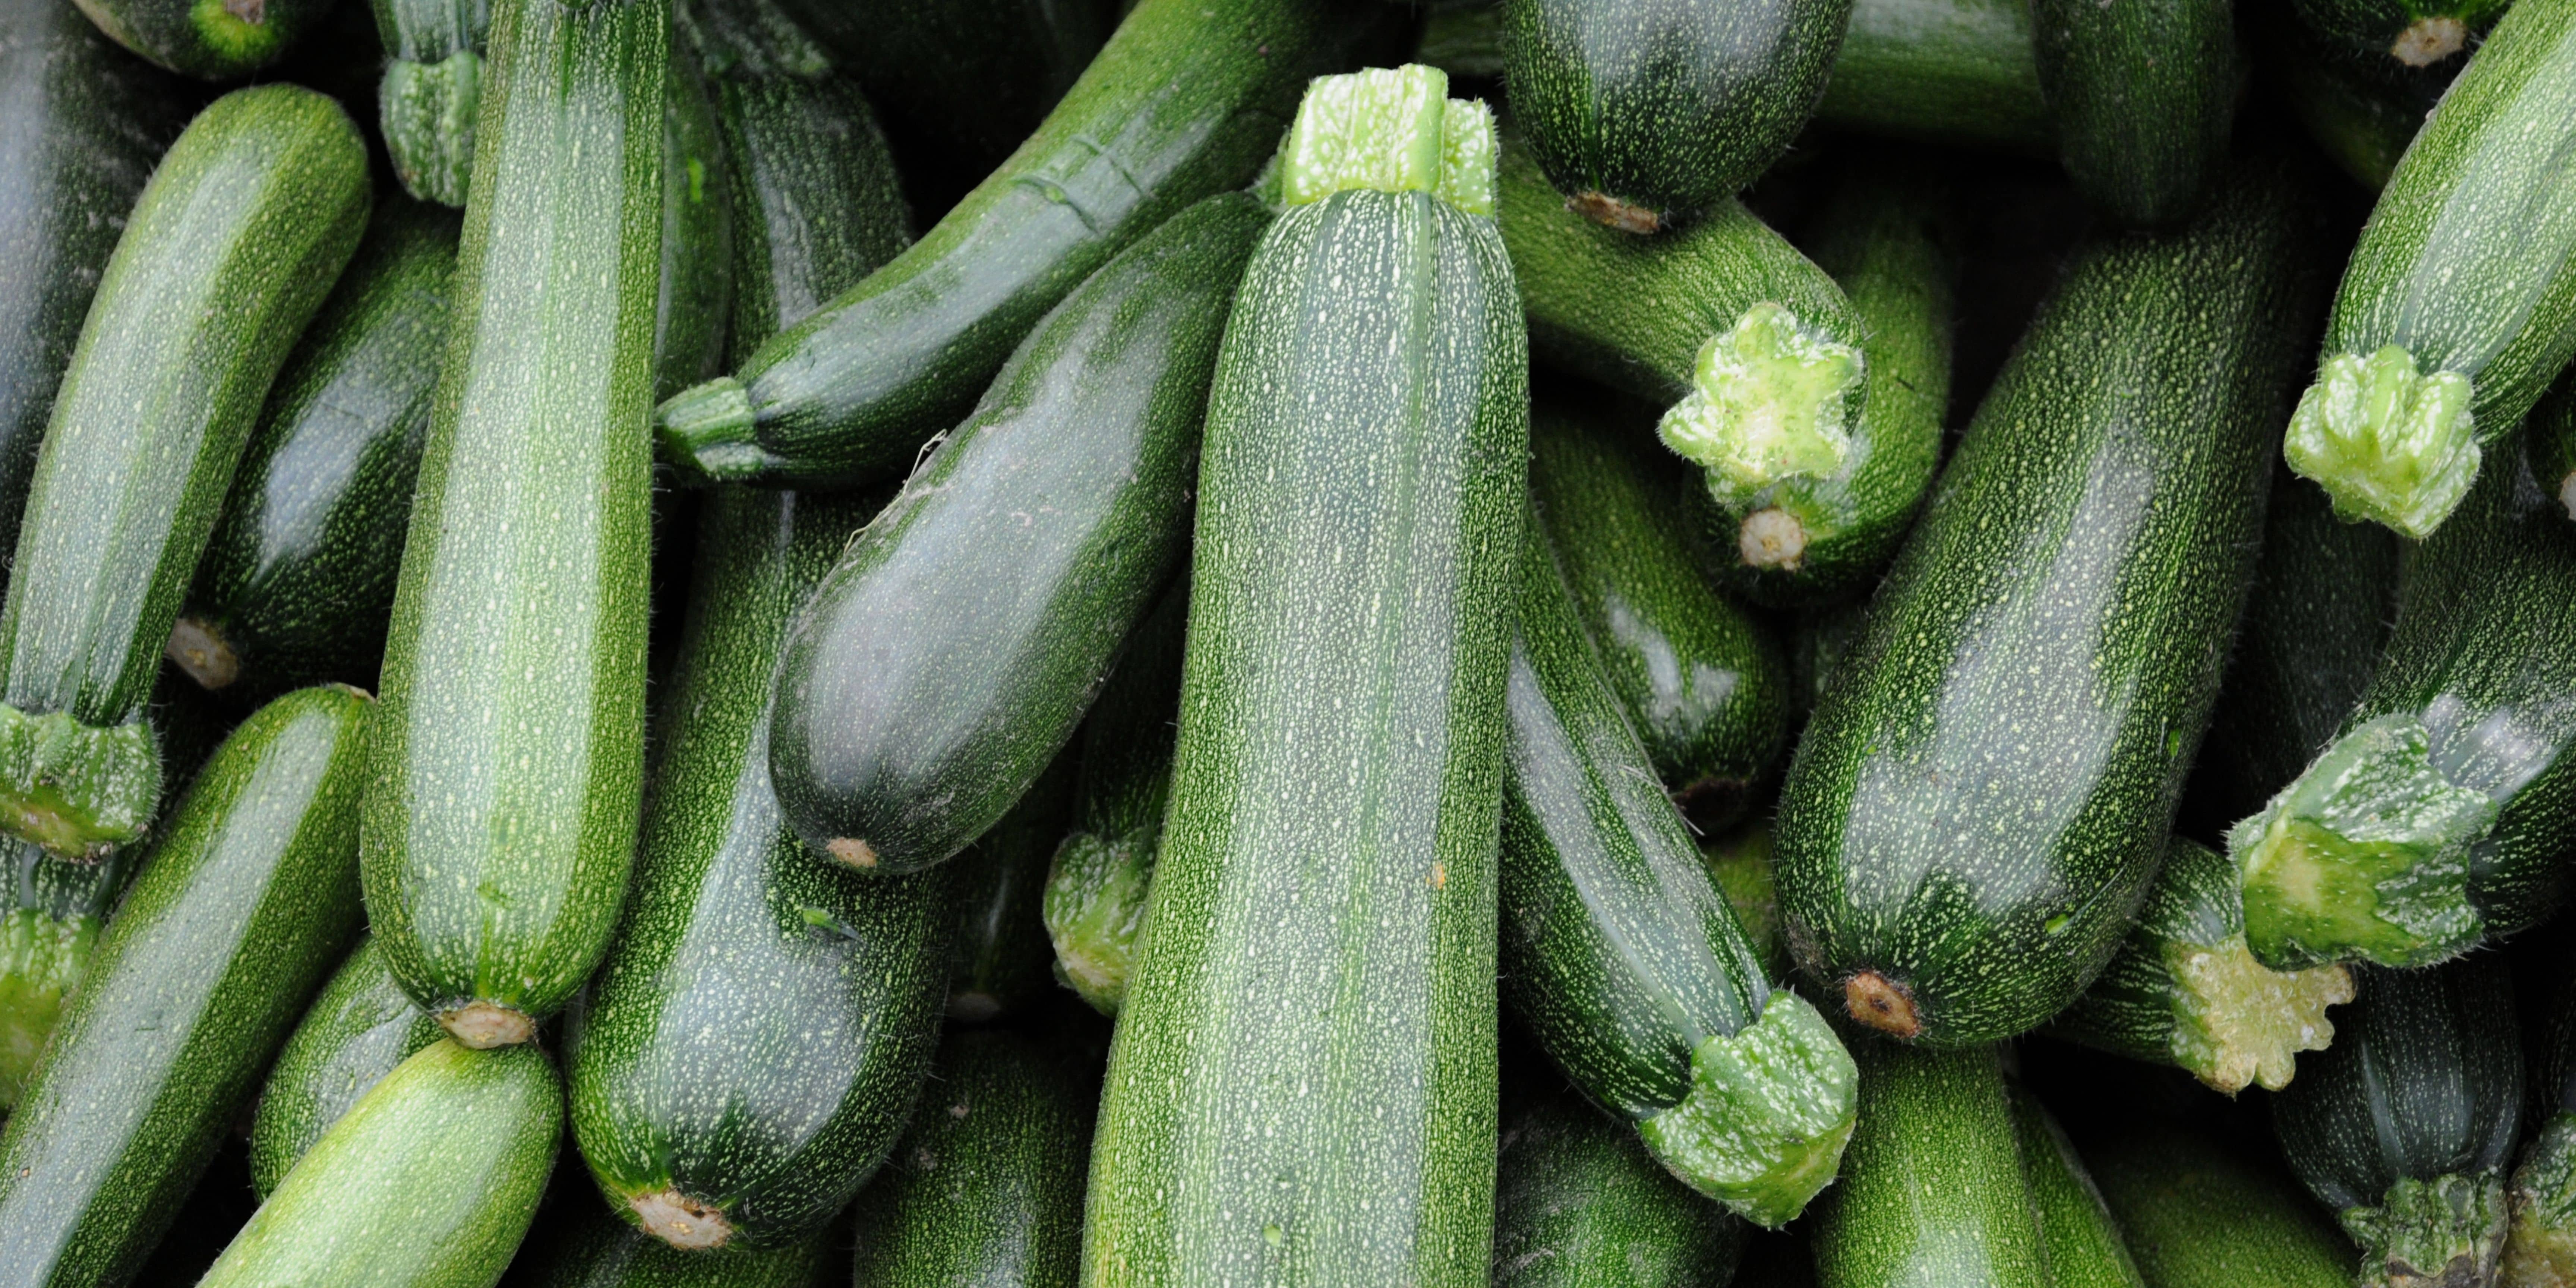 Courgettes being stored